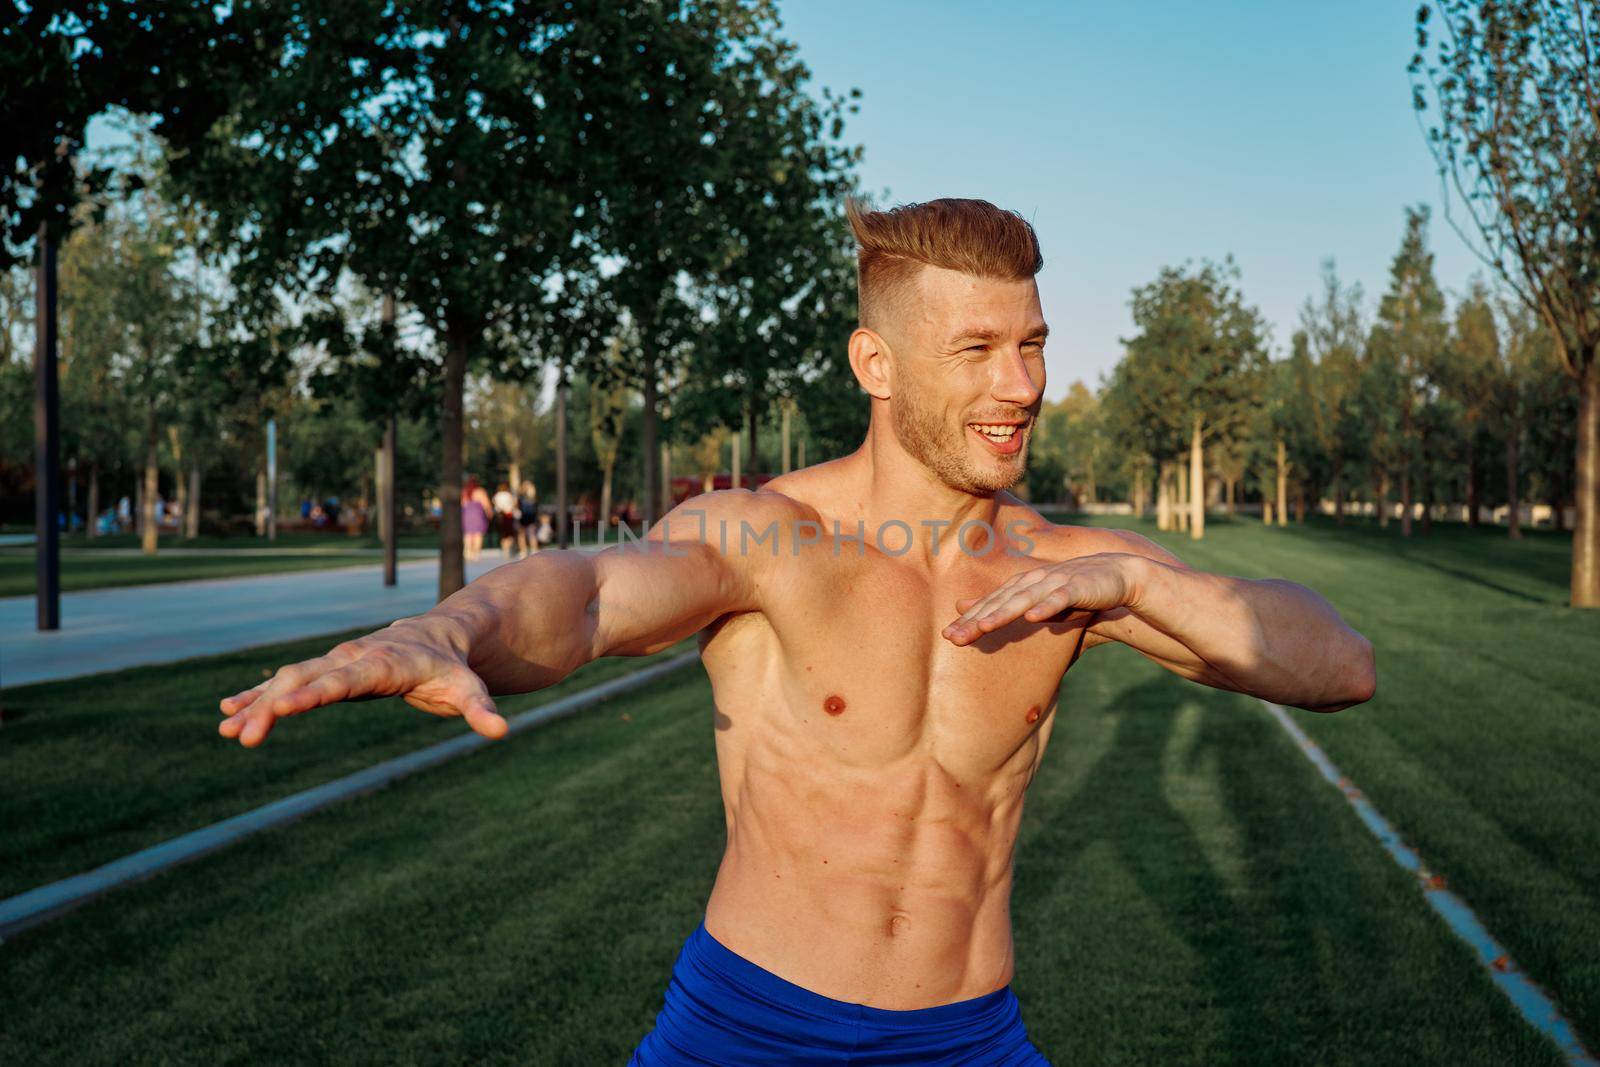 sports car pumped up cardio workout in the park. High quality photo